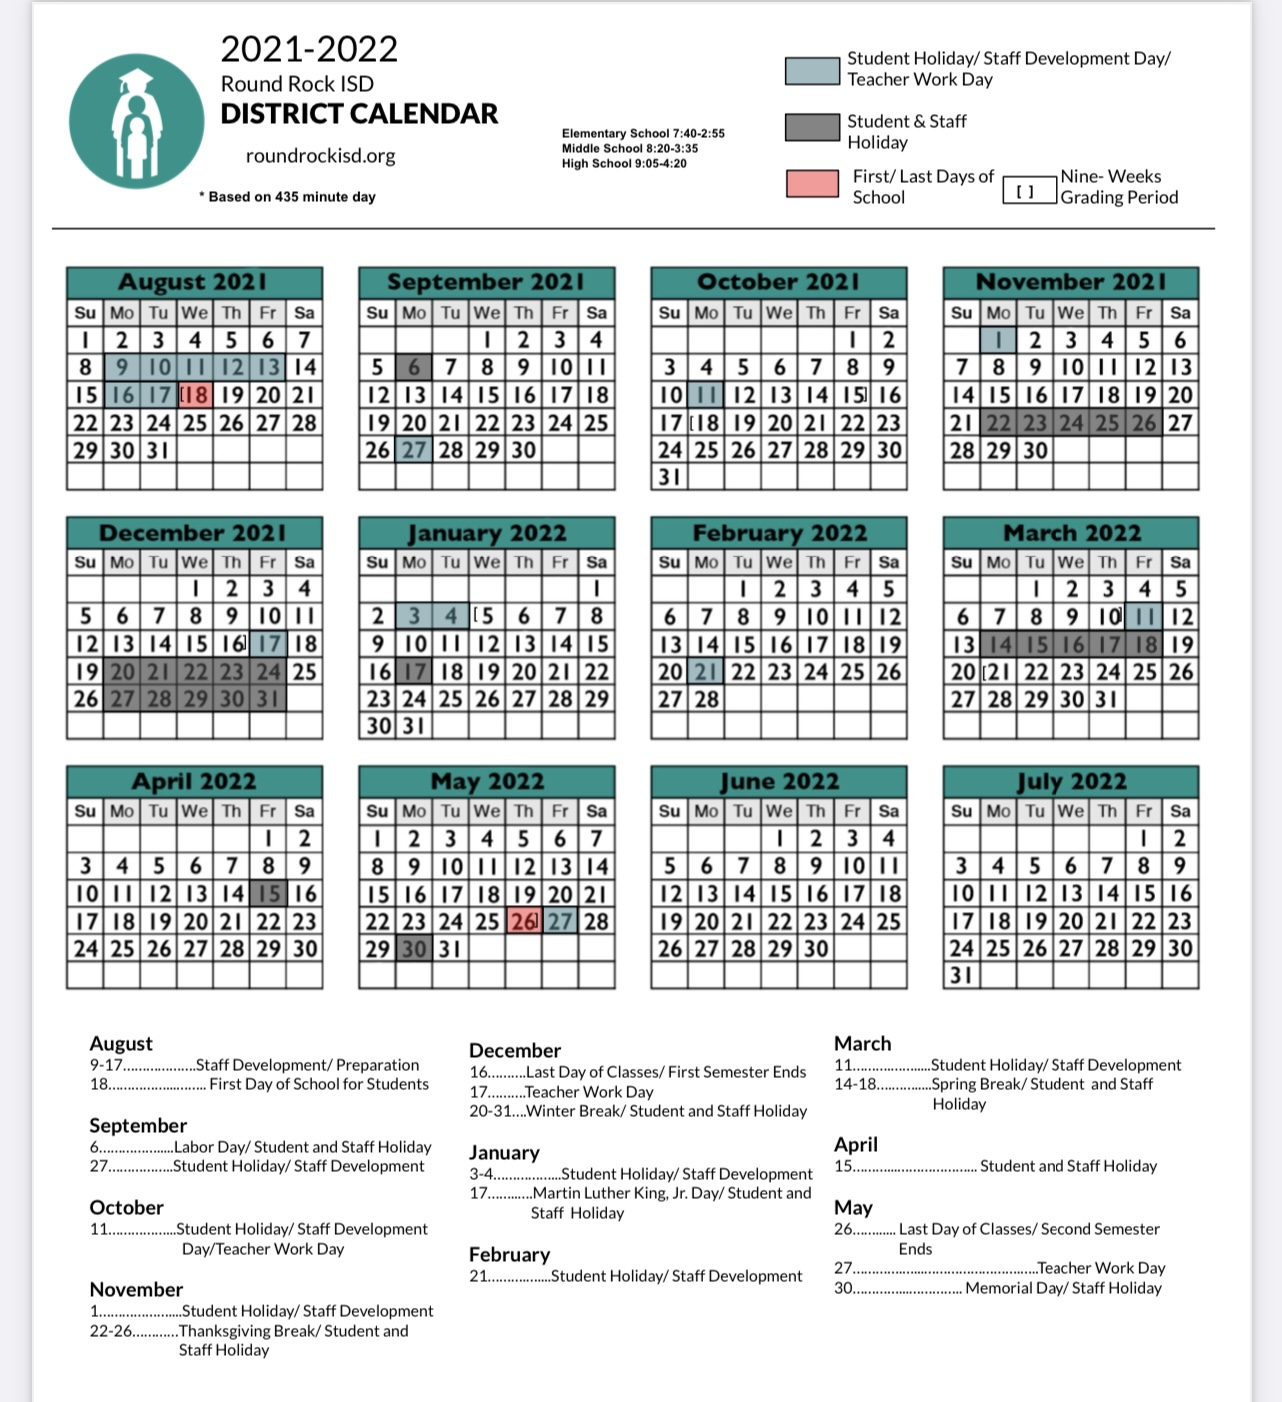 What You Need to Know About the RRISD Academic Calendar for 20212022